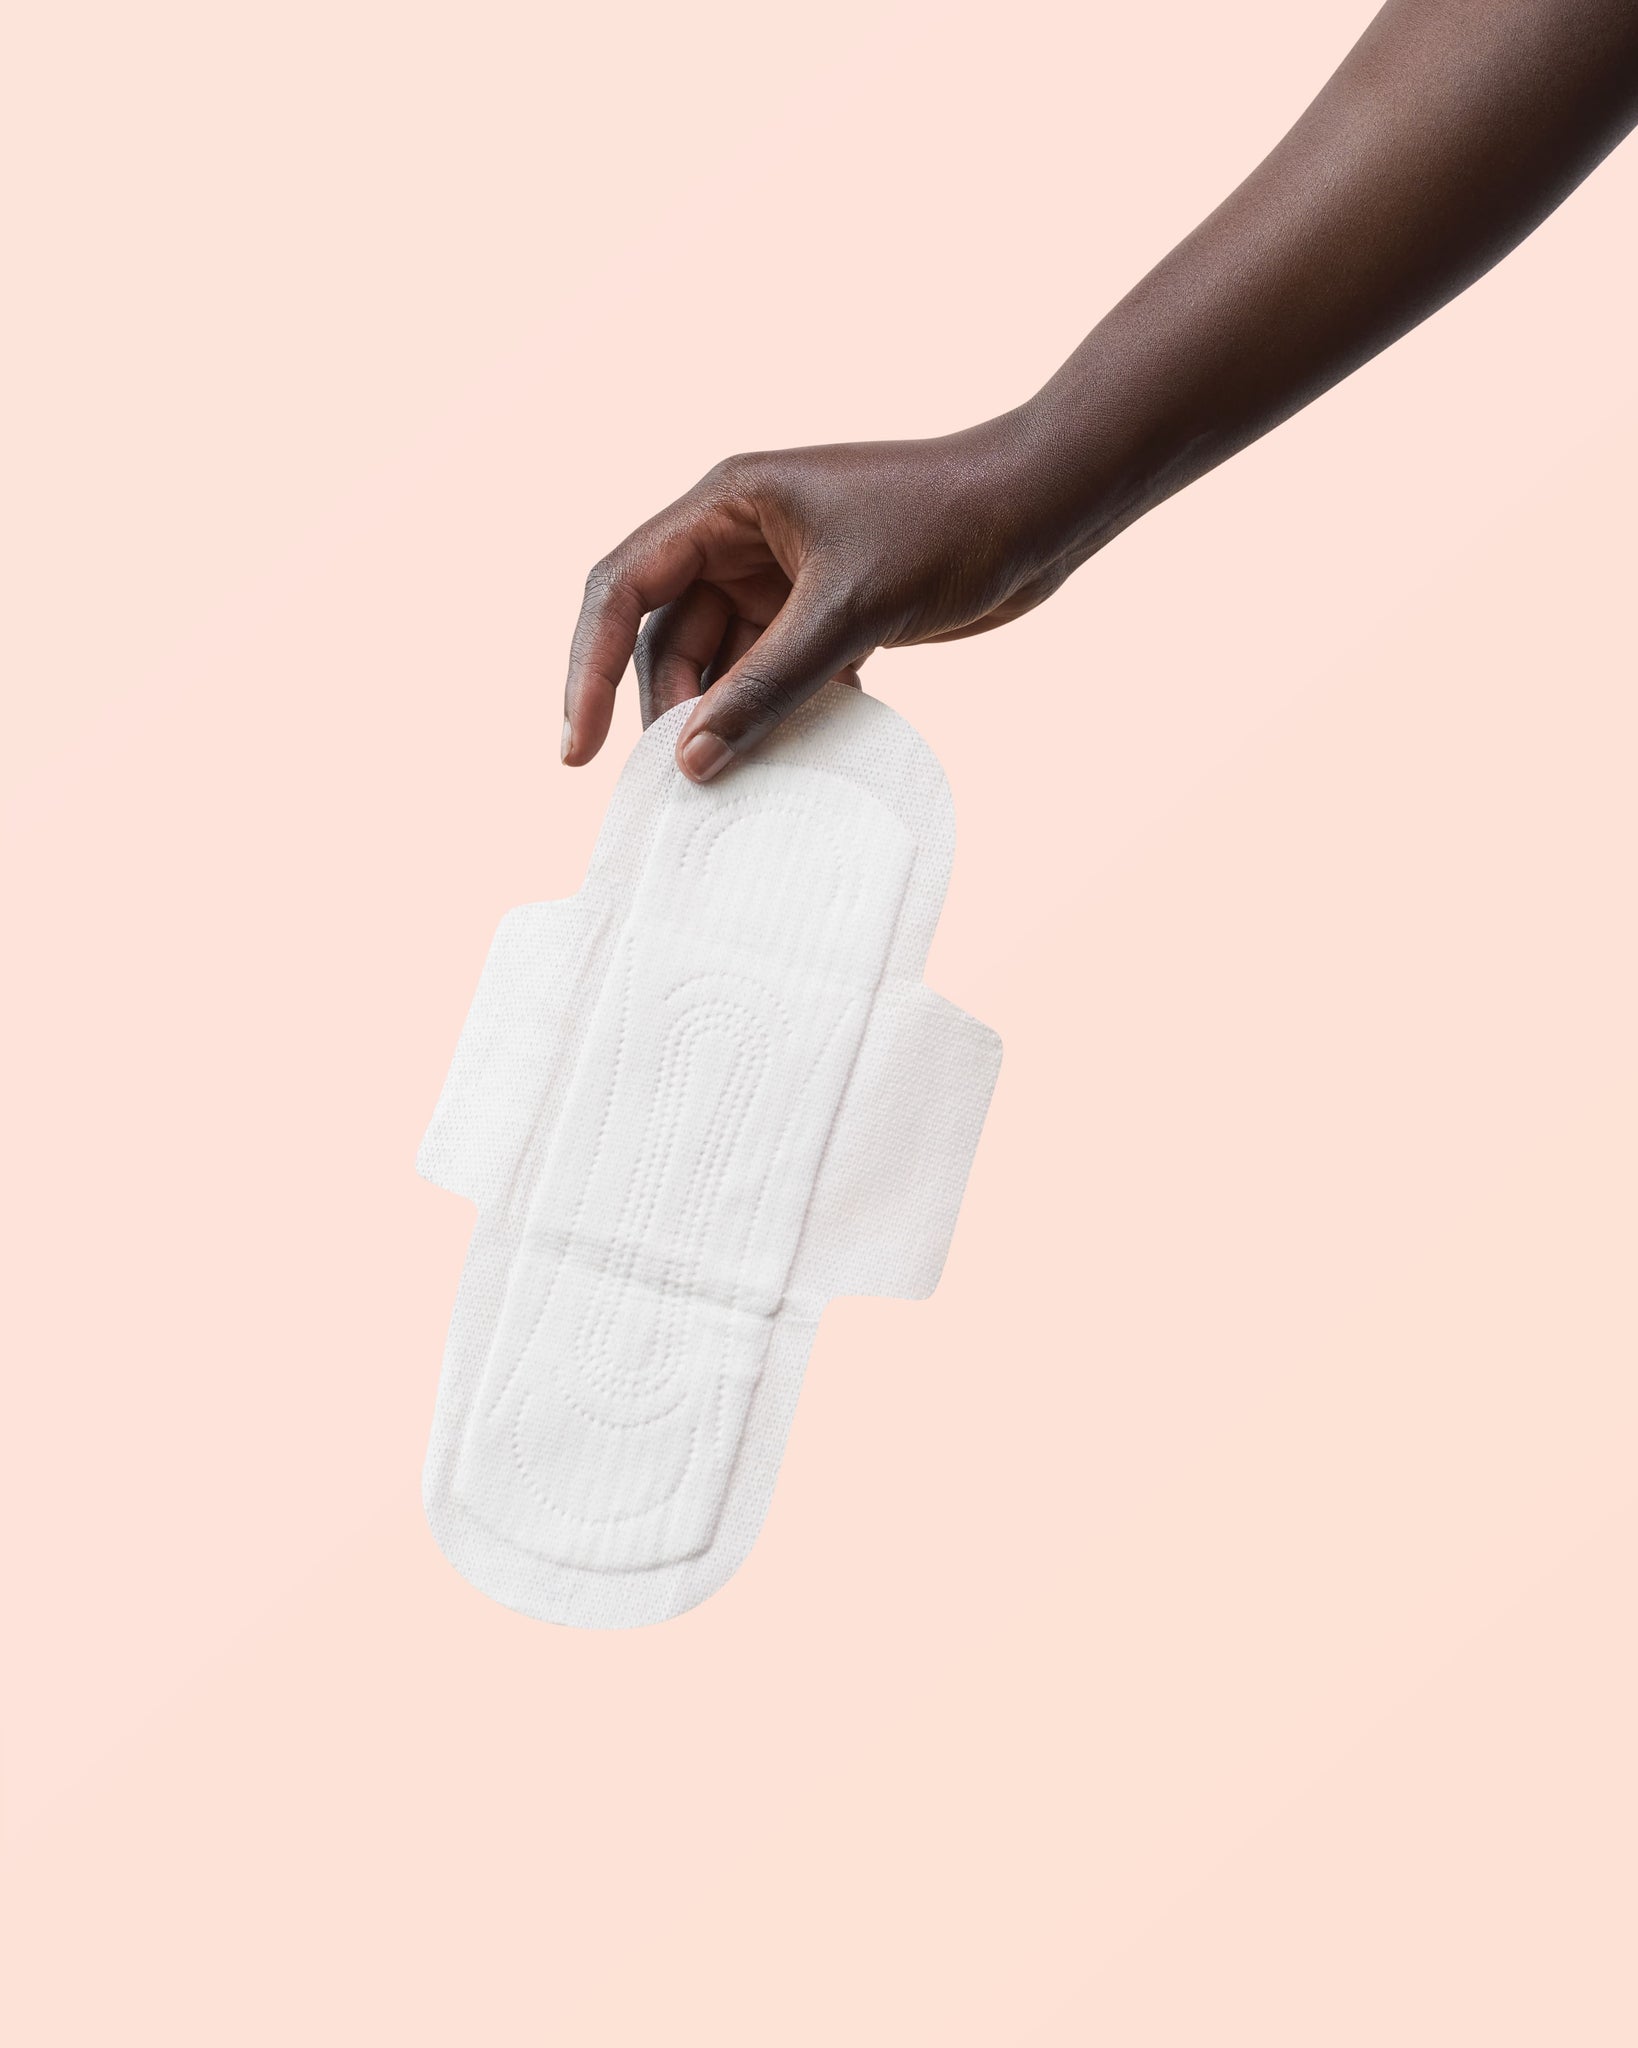 Yoni Pads Heavy, Super absorbent, Soft, Breathable, Bioplastic backing, Cornstarch, Hypoallergenic, 82% Organic Cotton, Sustainable Living, Safe For Vagina, Eco Sanitary Products, Period Care, inbrenghuls., Care Free Period, Chemical Free, Nourished, Nourishedeu